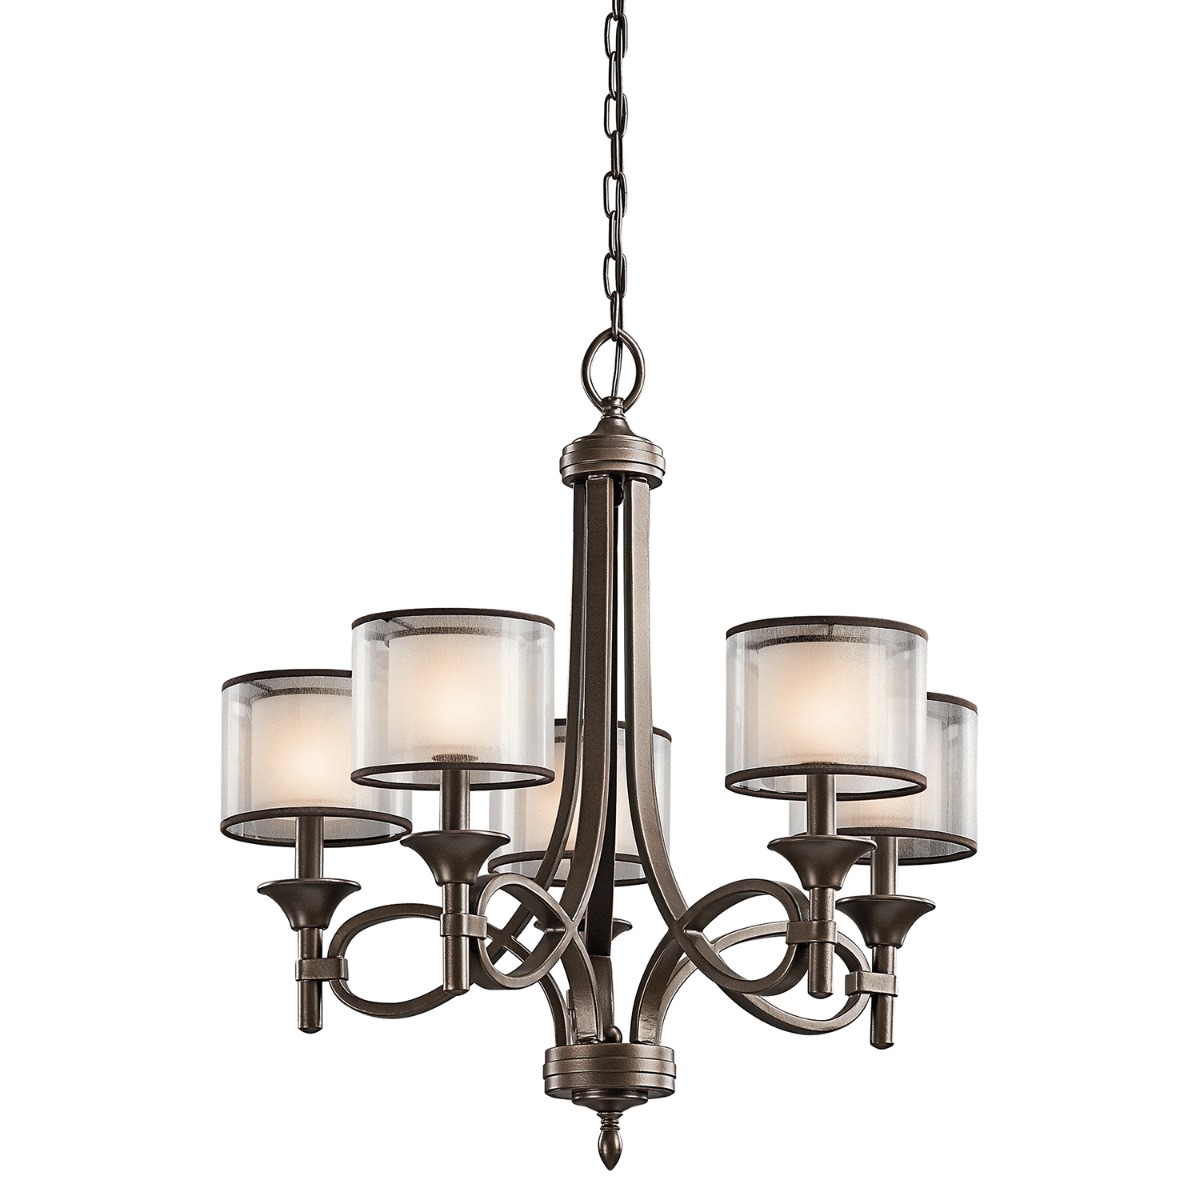 Image of KL-LACEY5-MB Lacey 5 Light Bronze Ceiling Light with Double Layer Shades